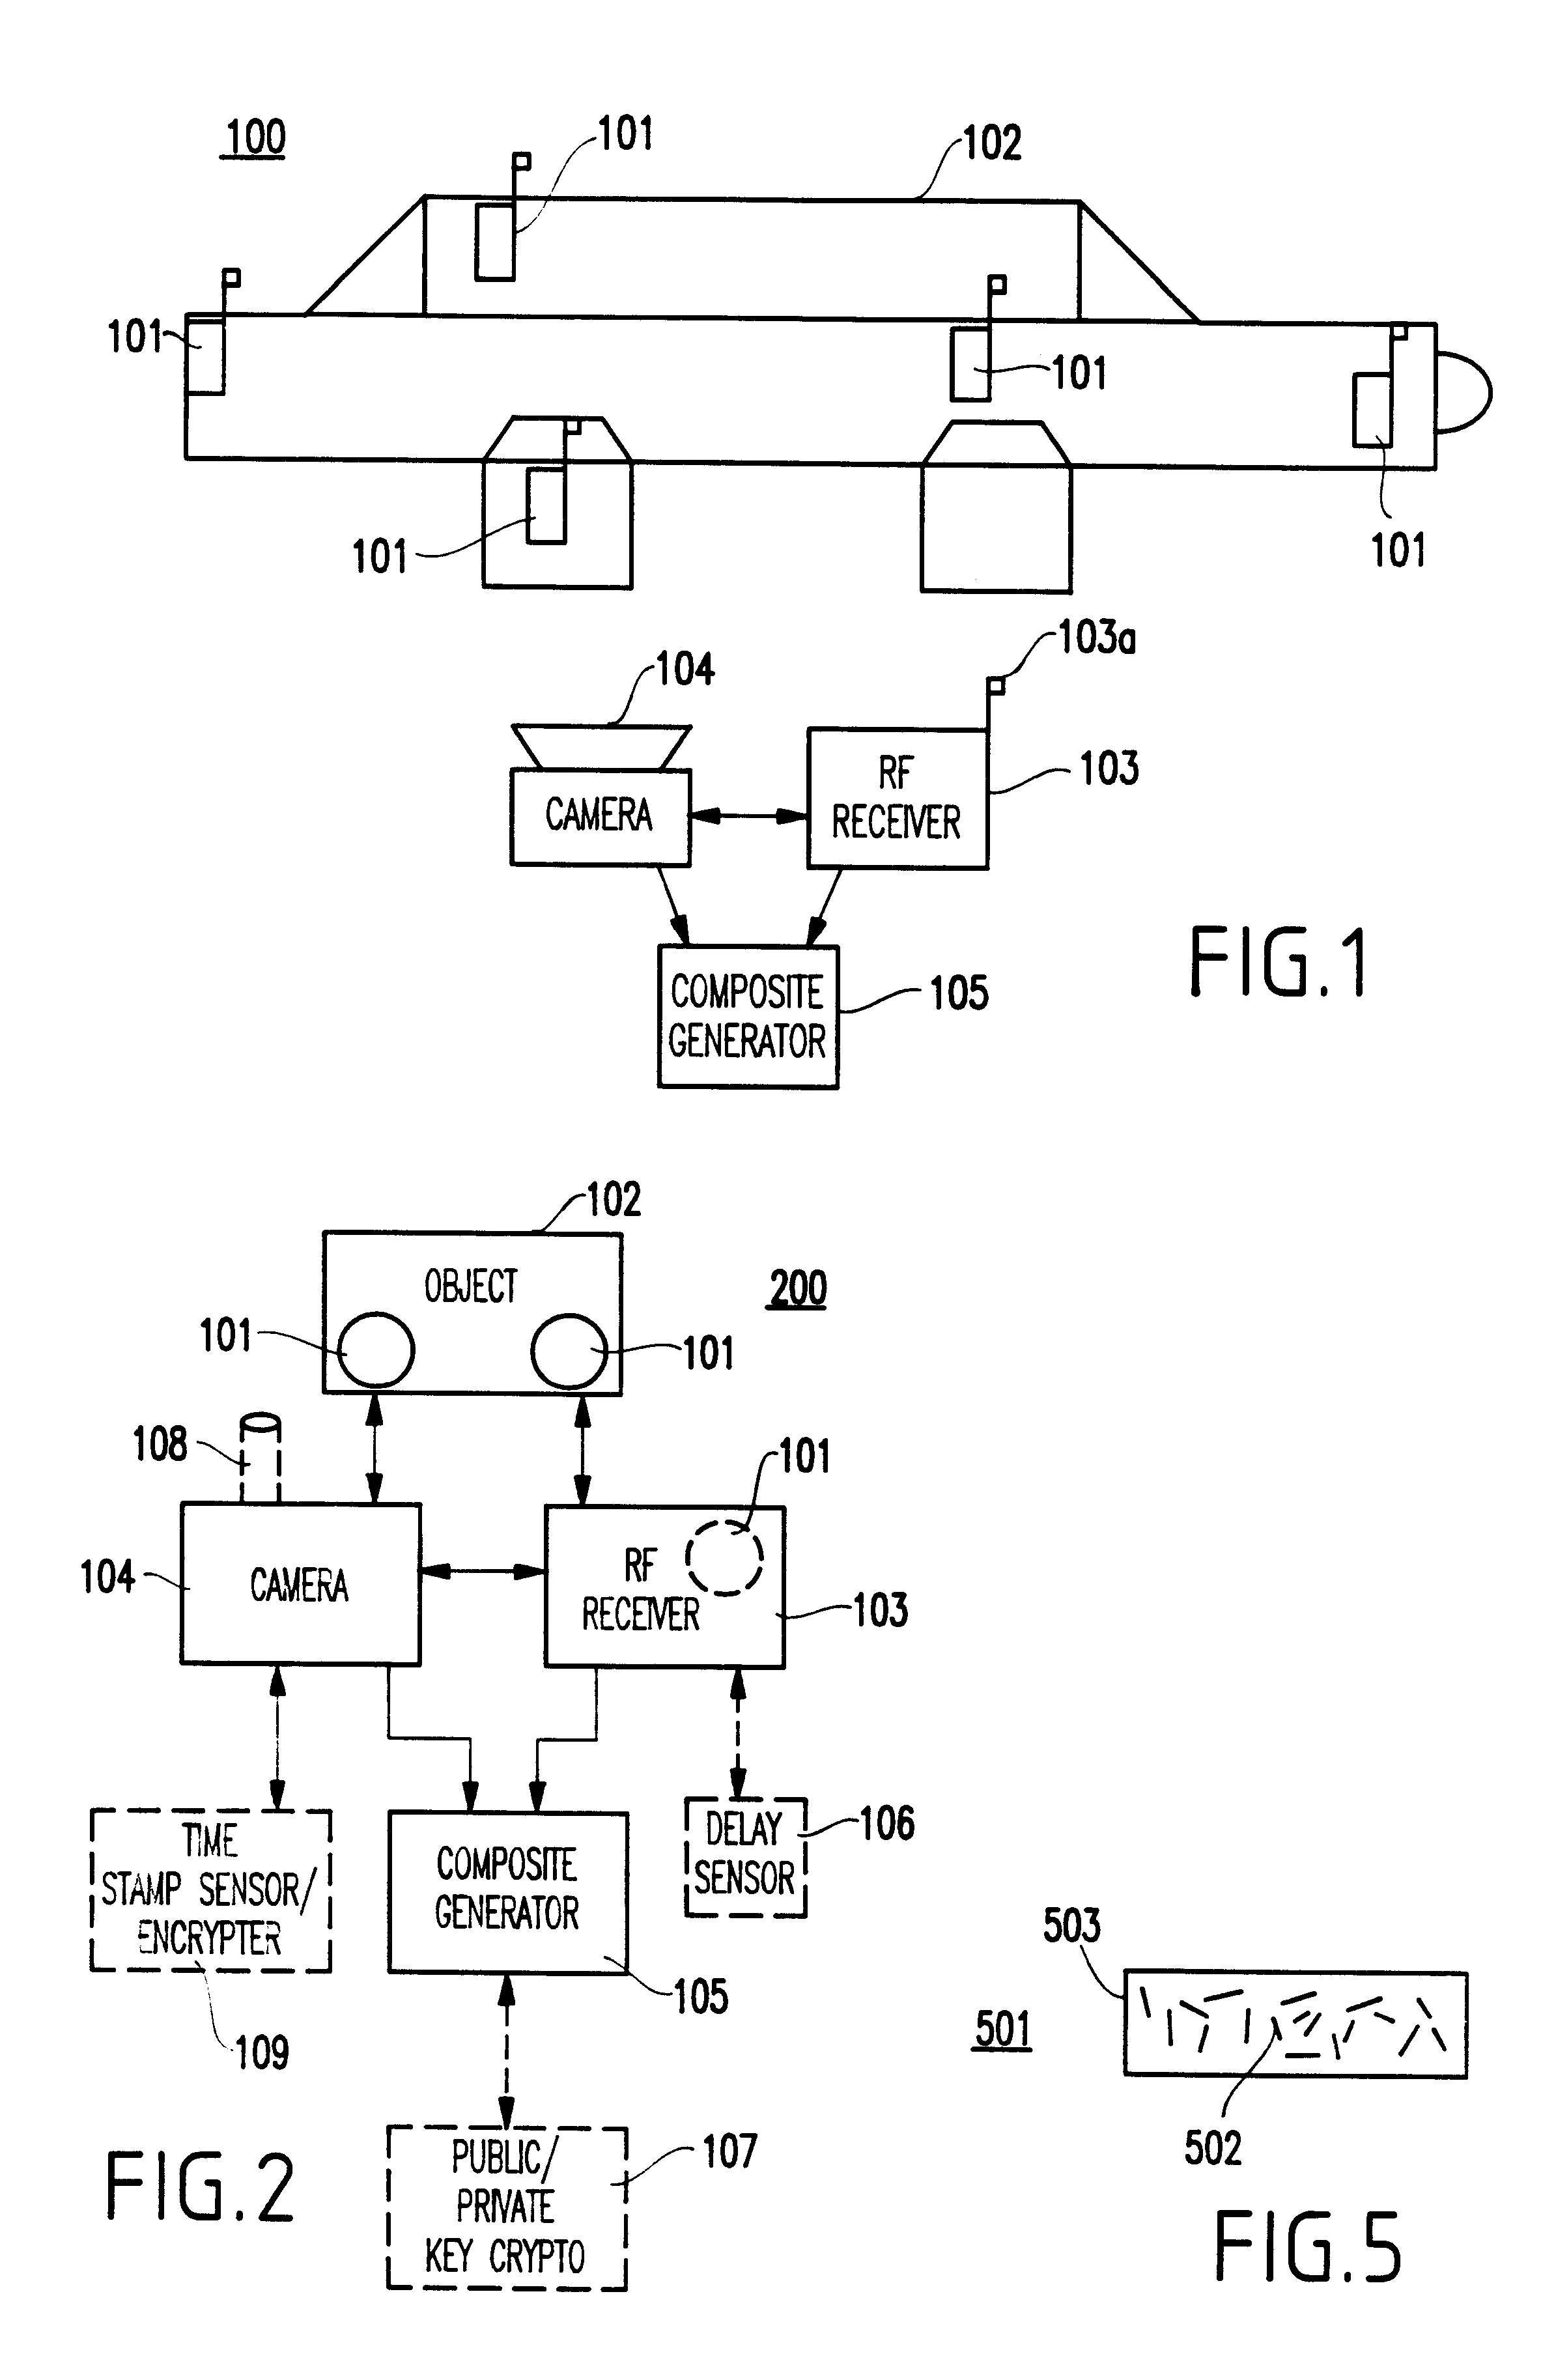 Method and system for authenticating objects and object data